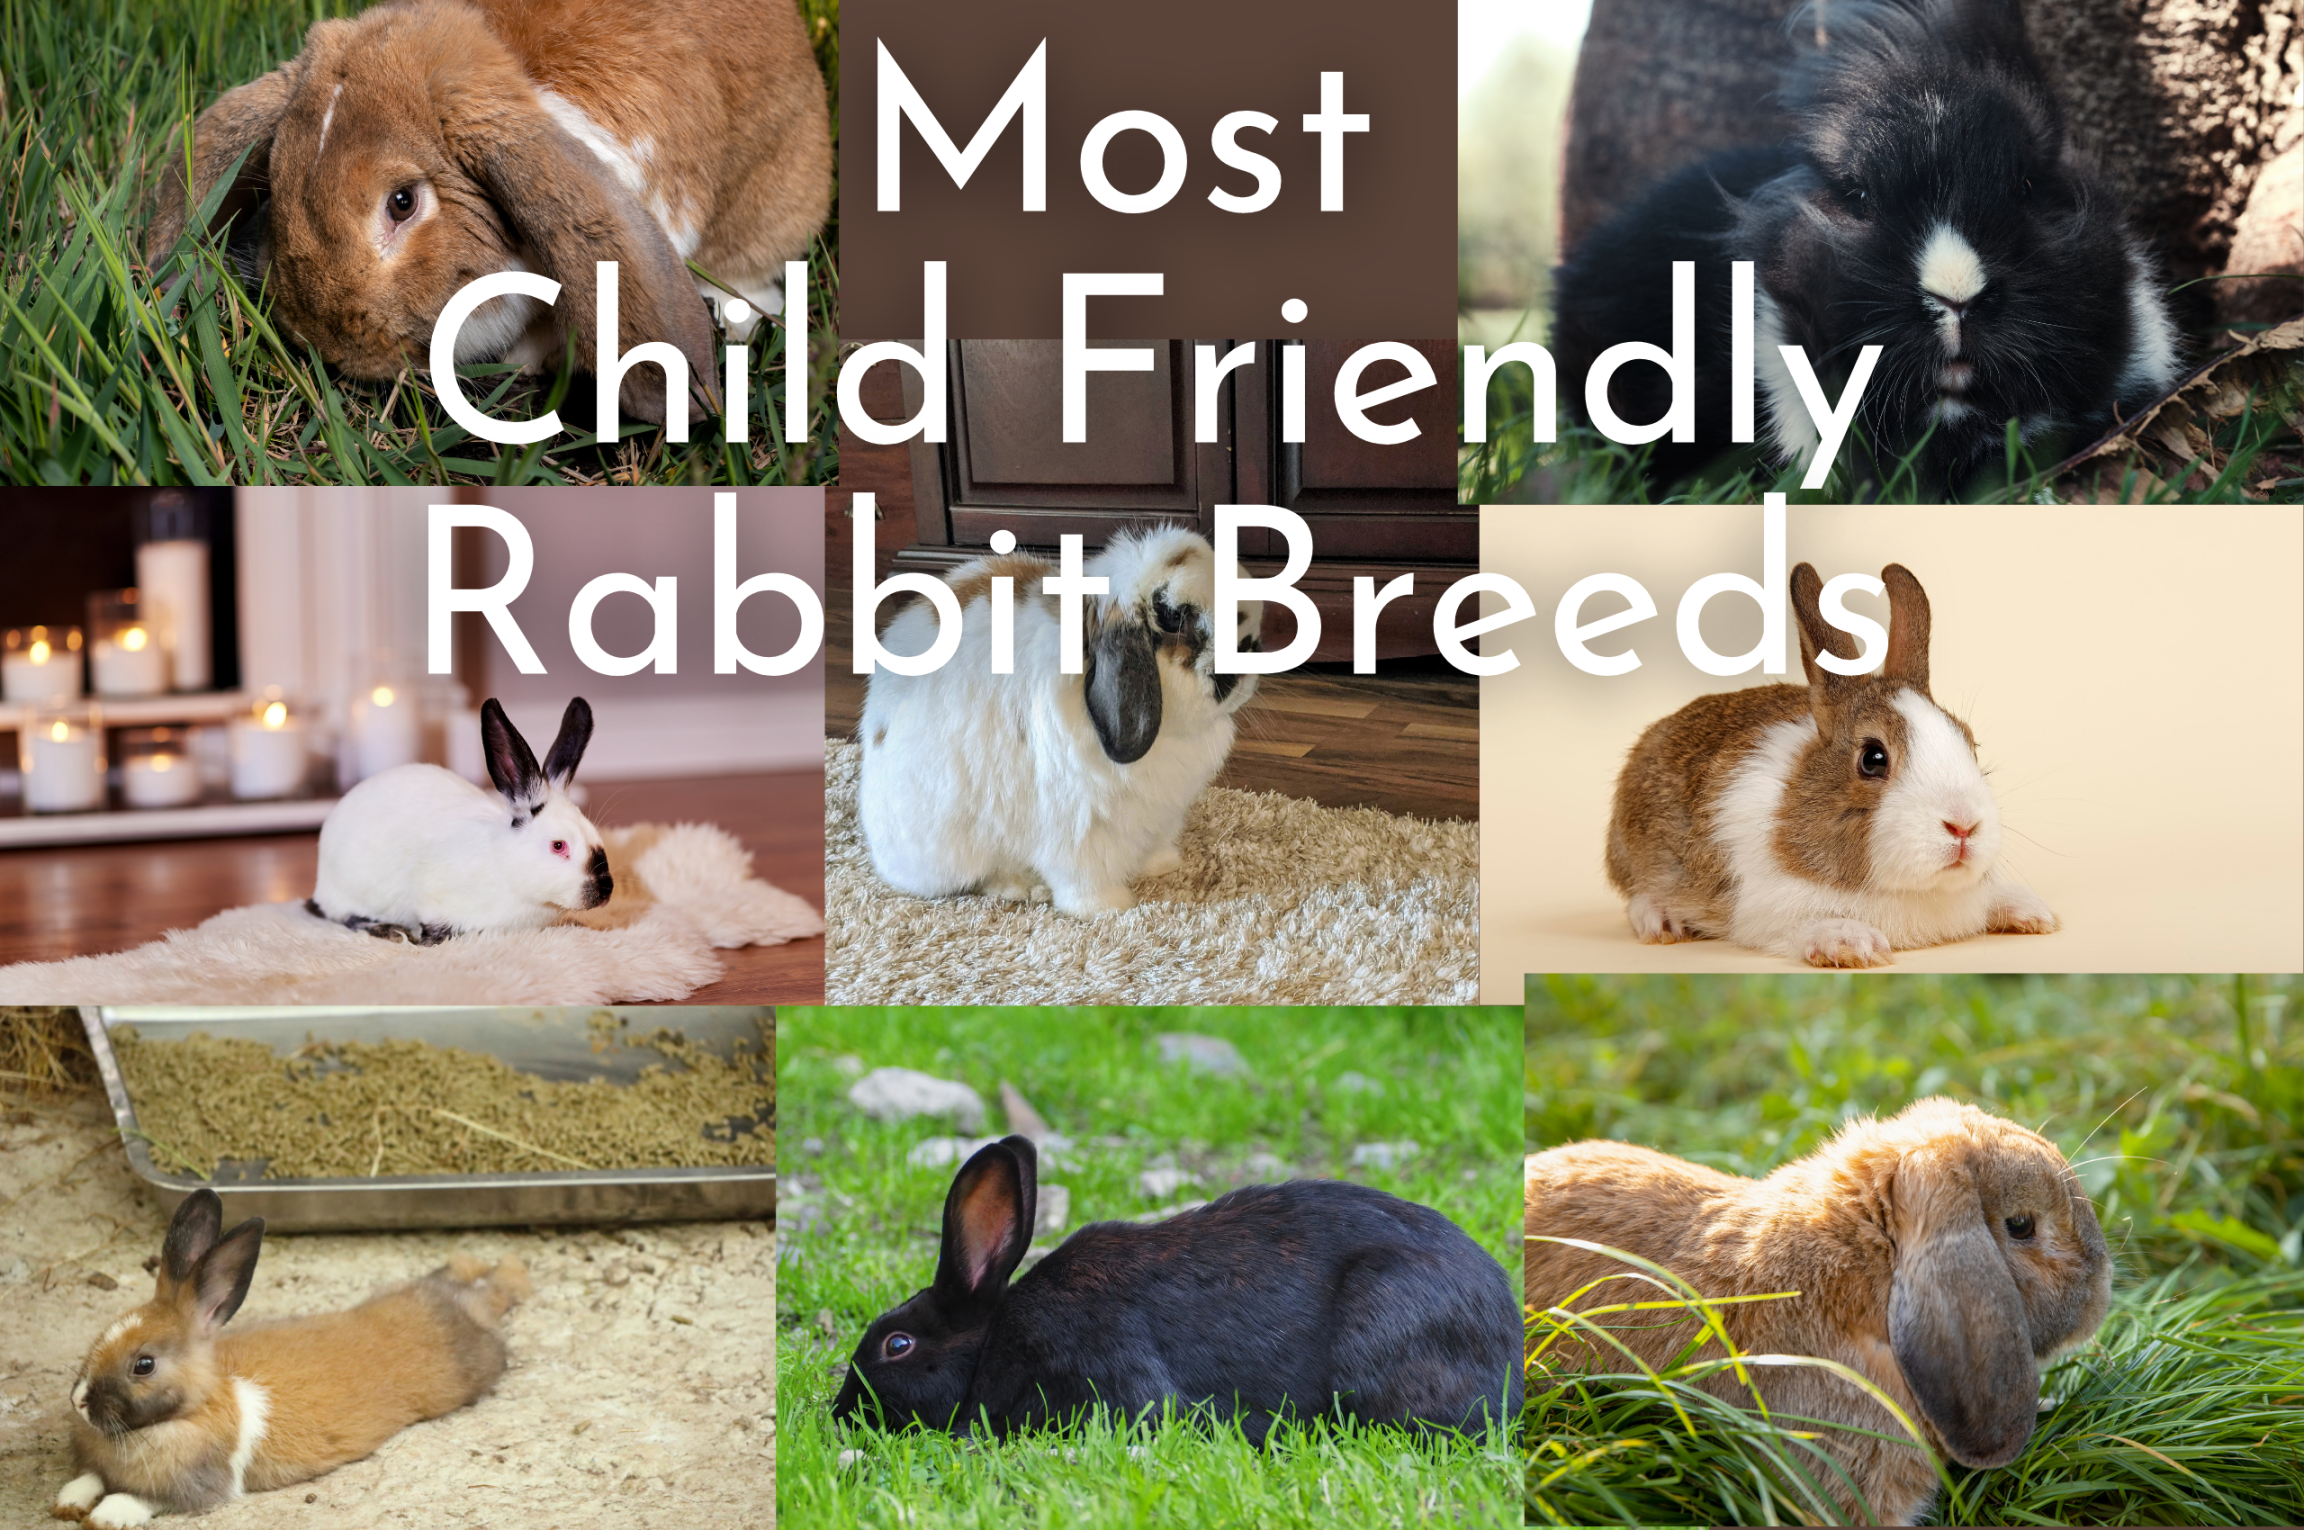 Which Breed of Rabbit is Most Child Friendly? - Every Bunny Welcome